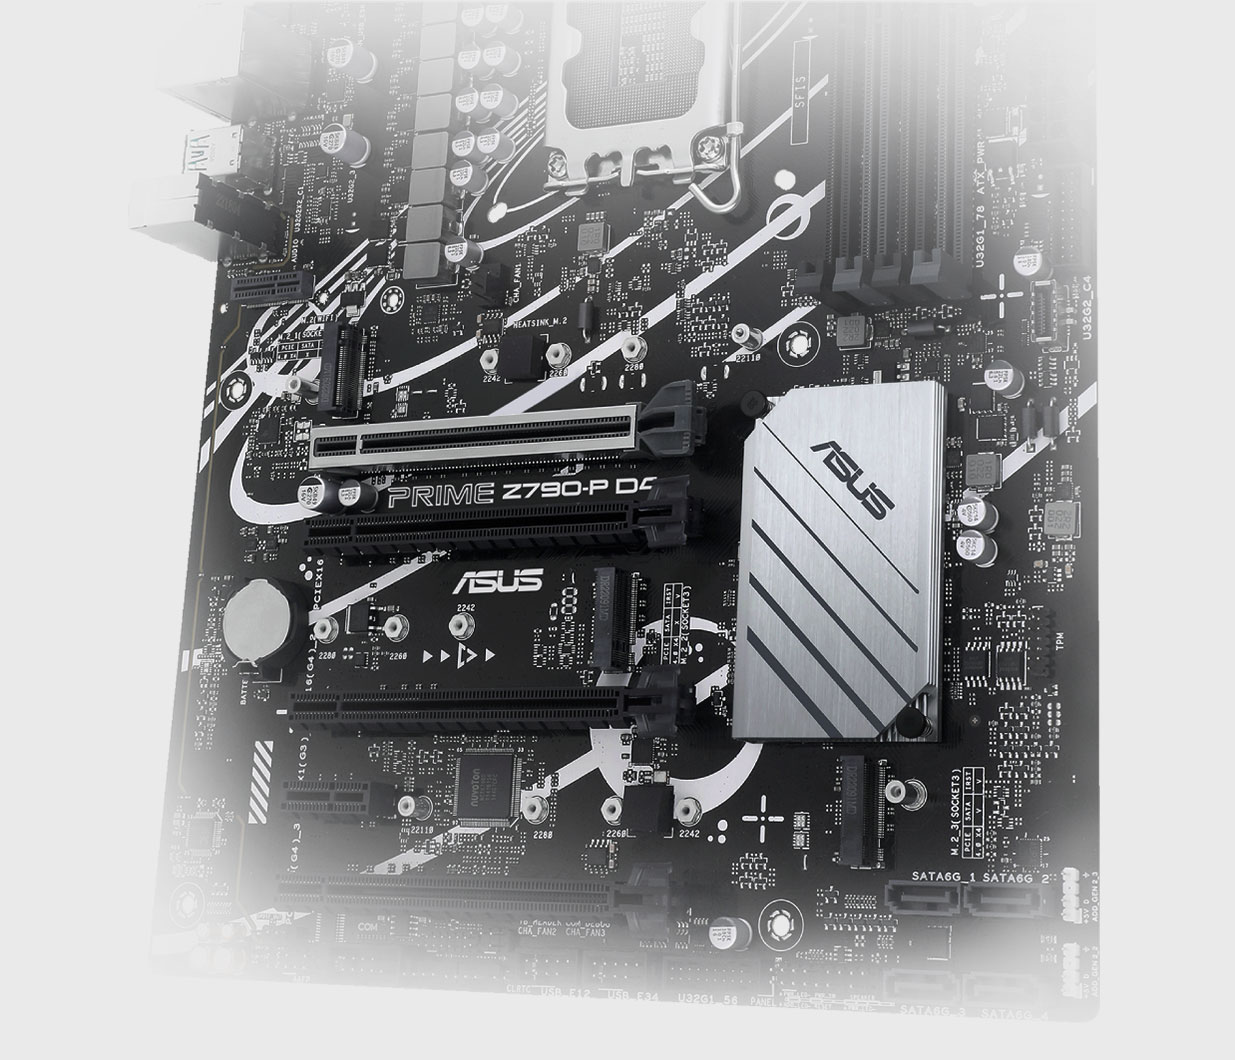 The PRIME Z790-P motherboard supports three M.2 slots.